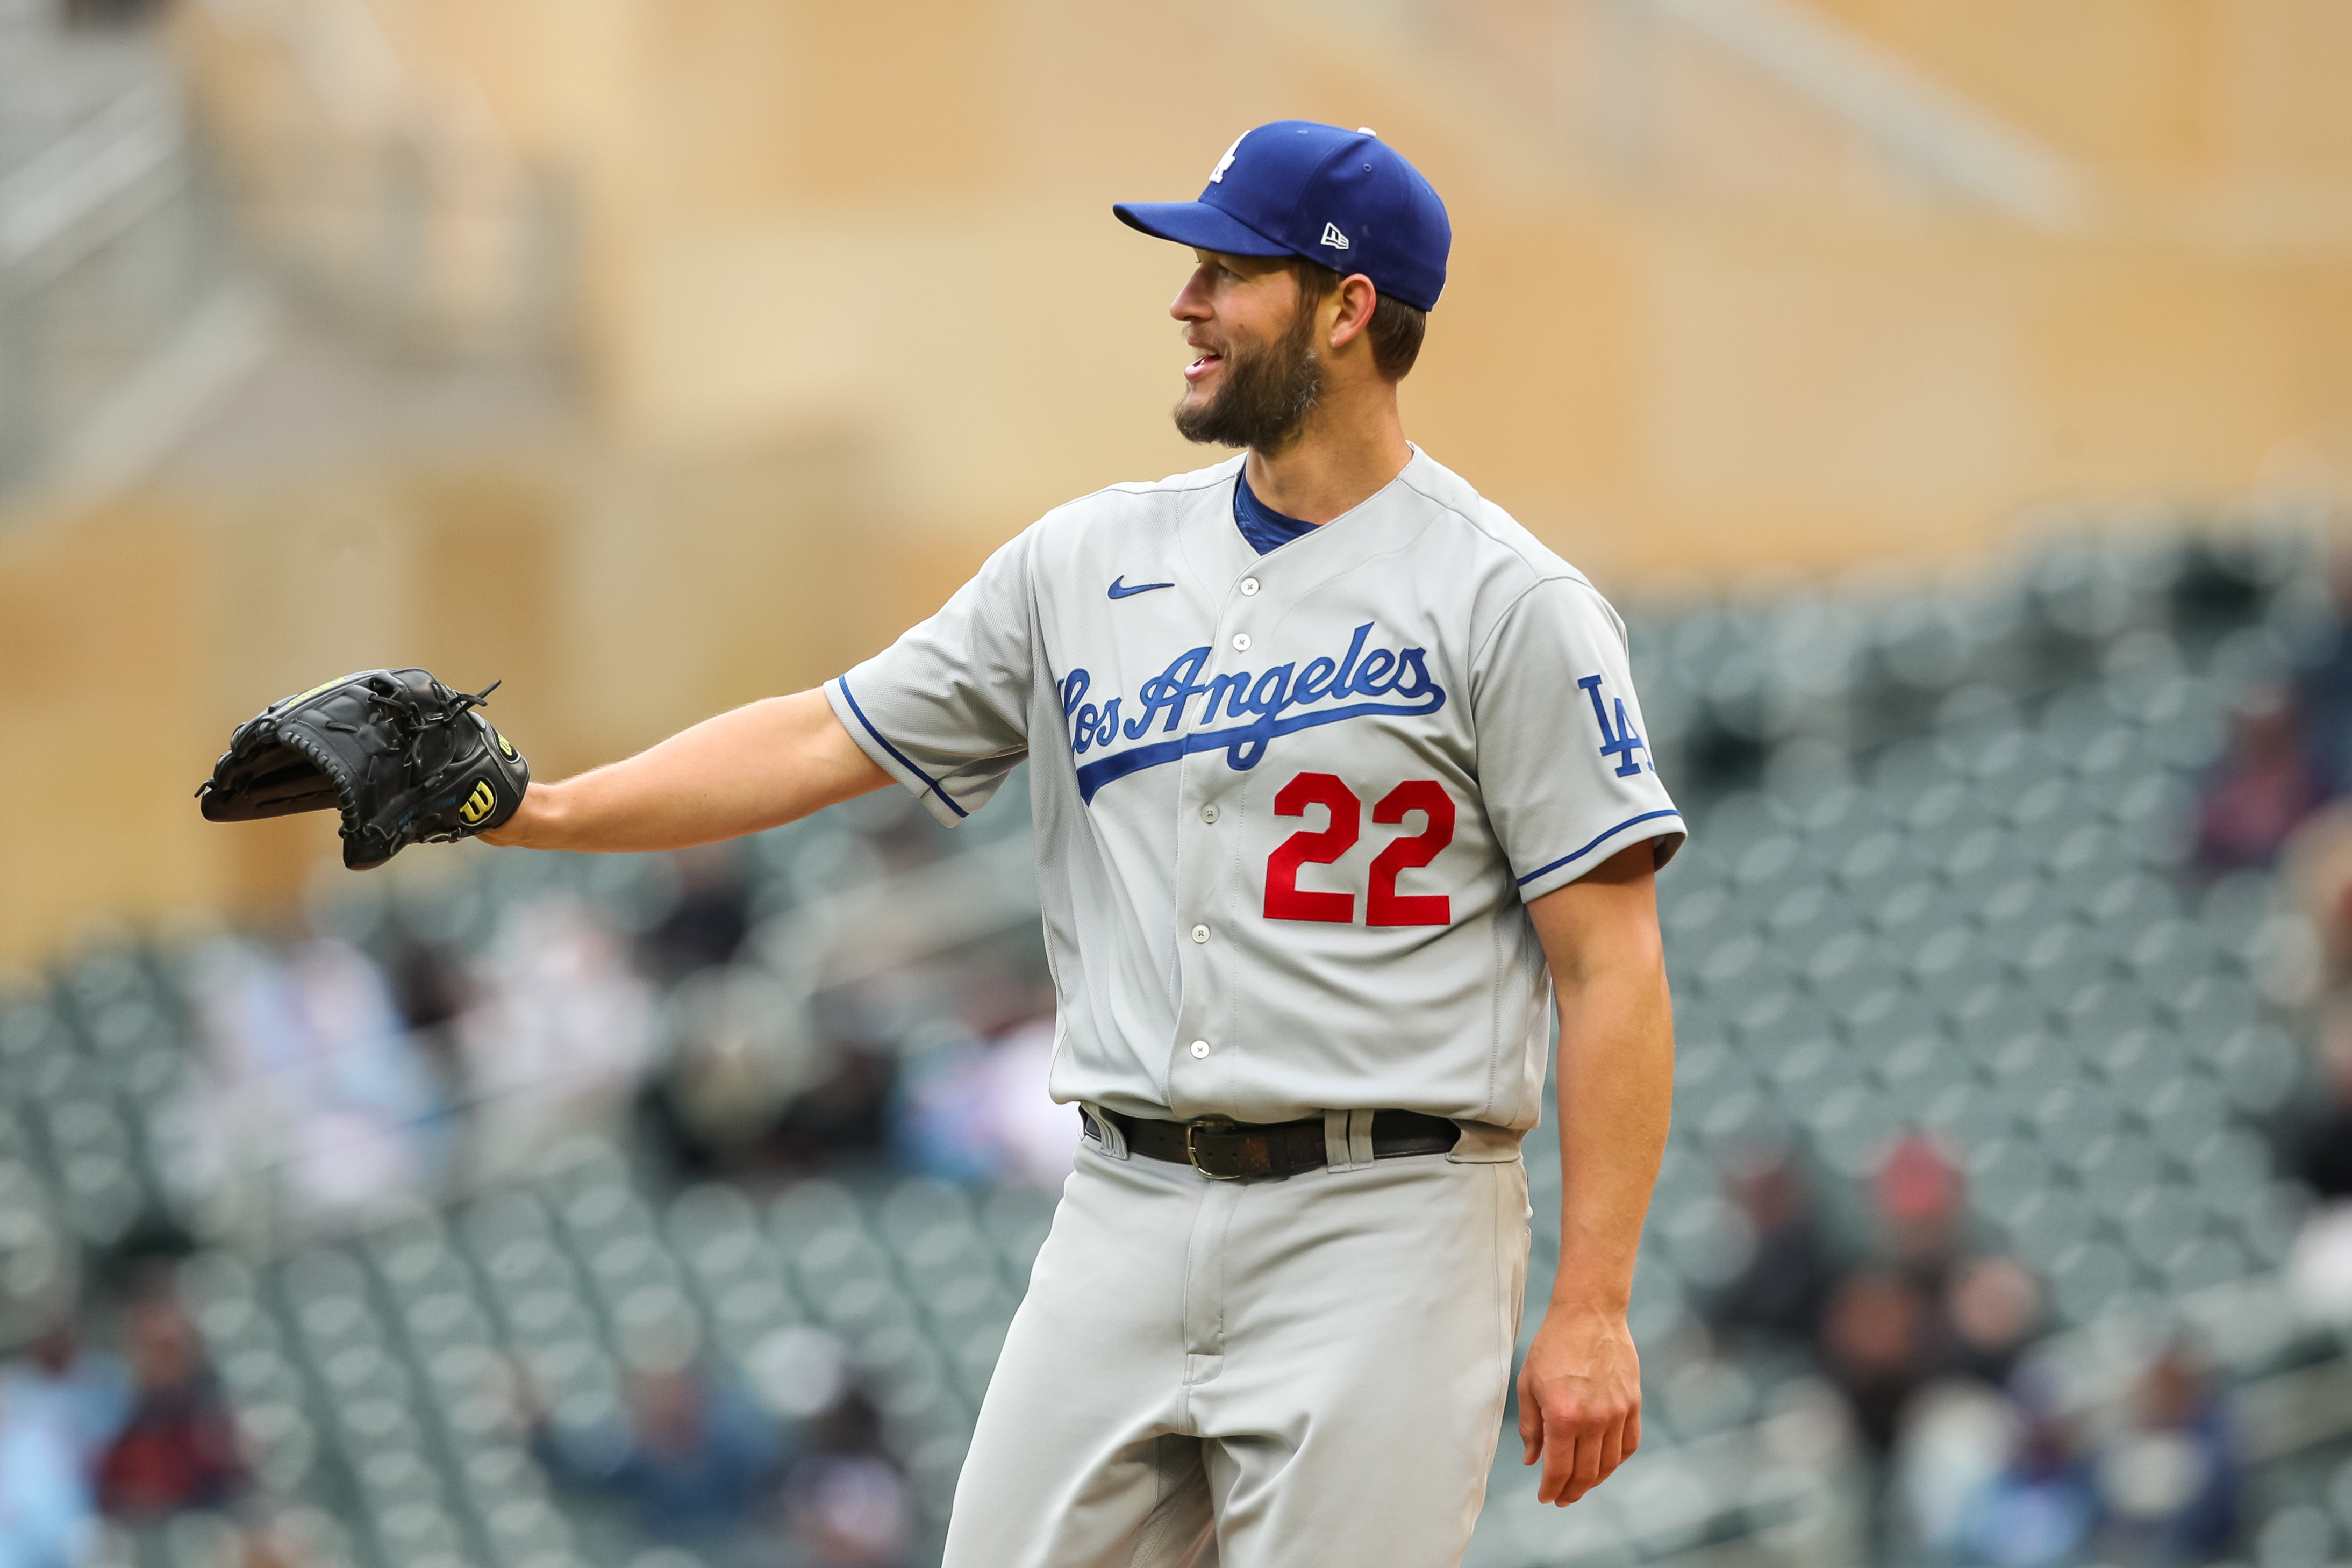 dodgers players numbers 2022